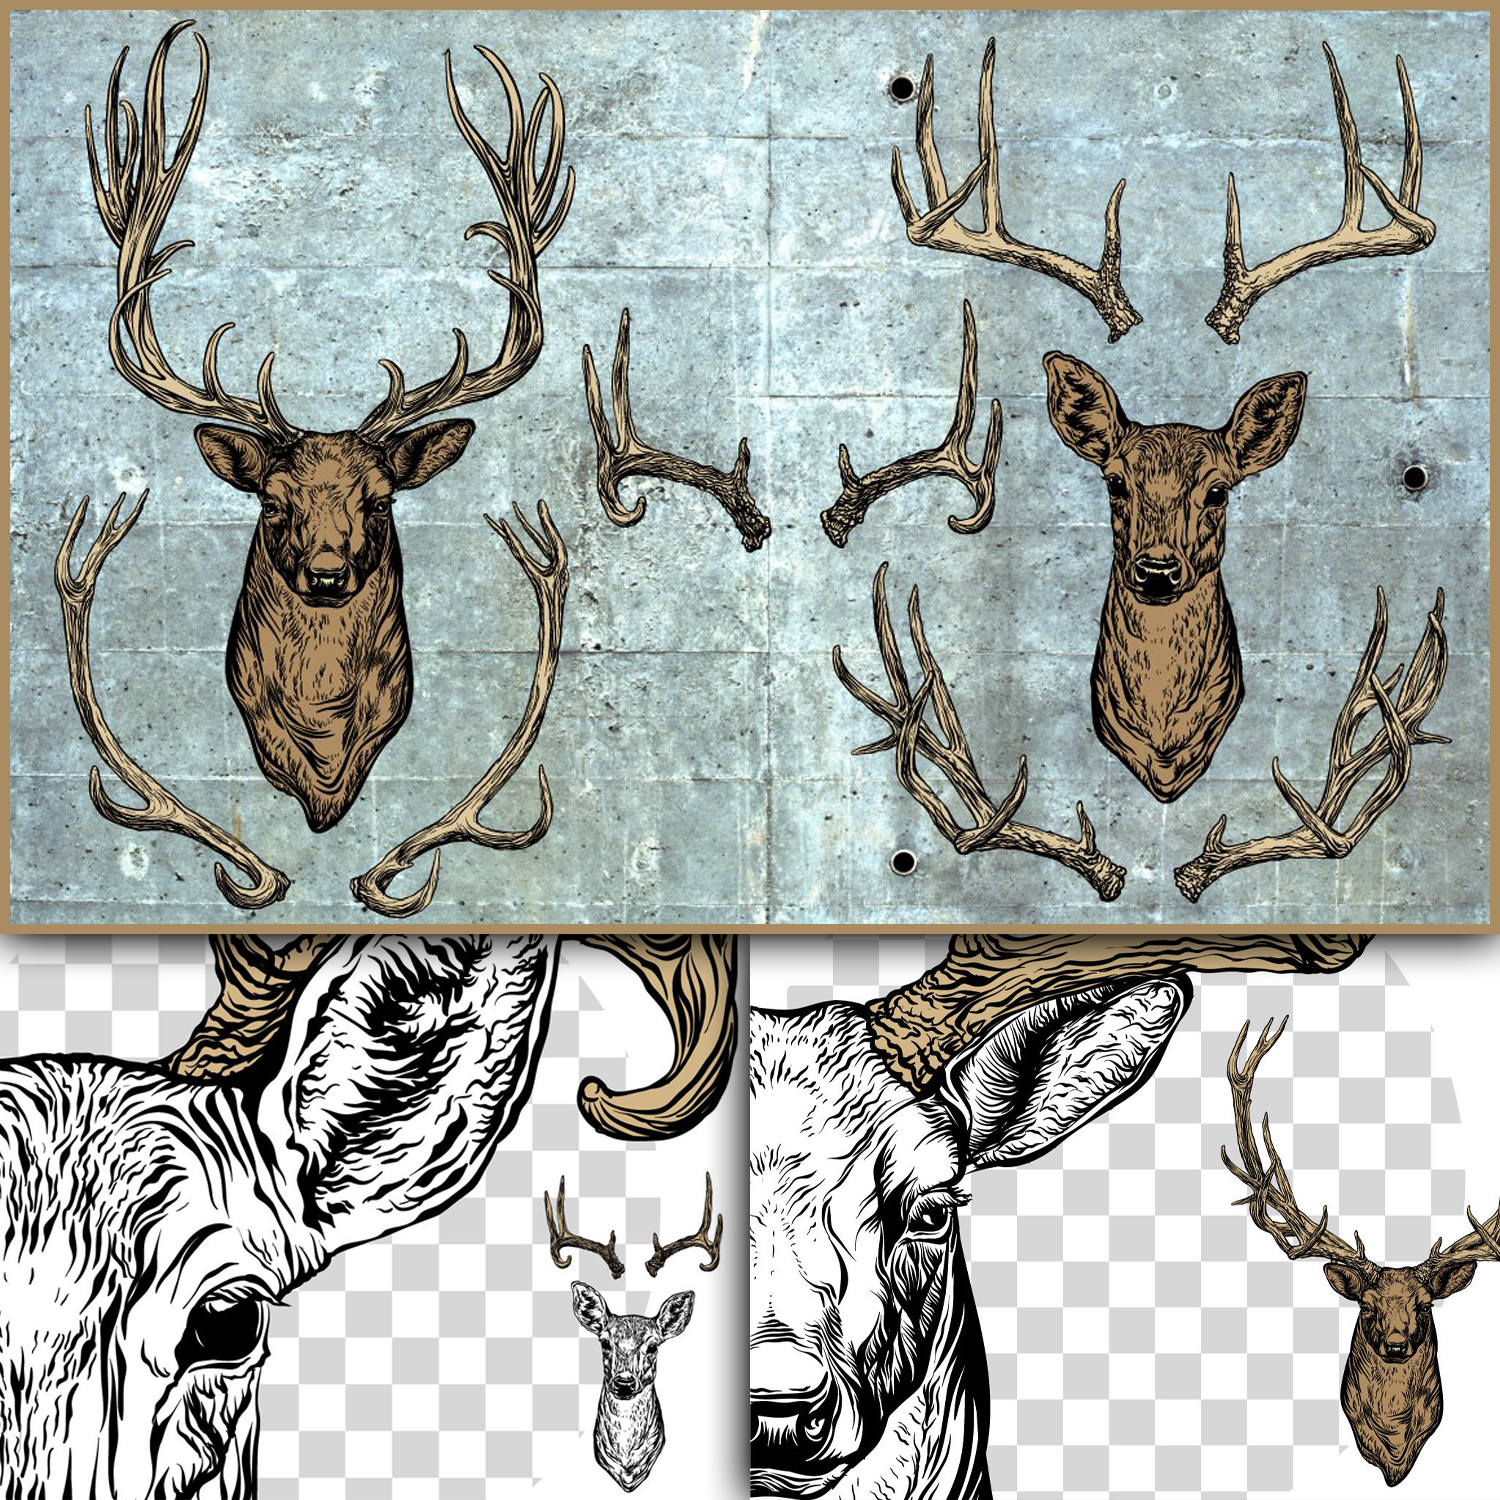 Images with deer and antlers set.